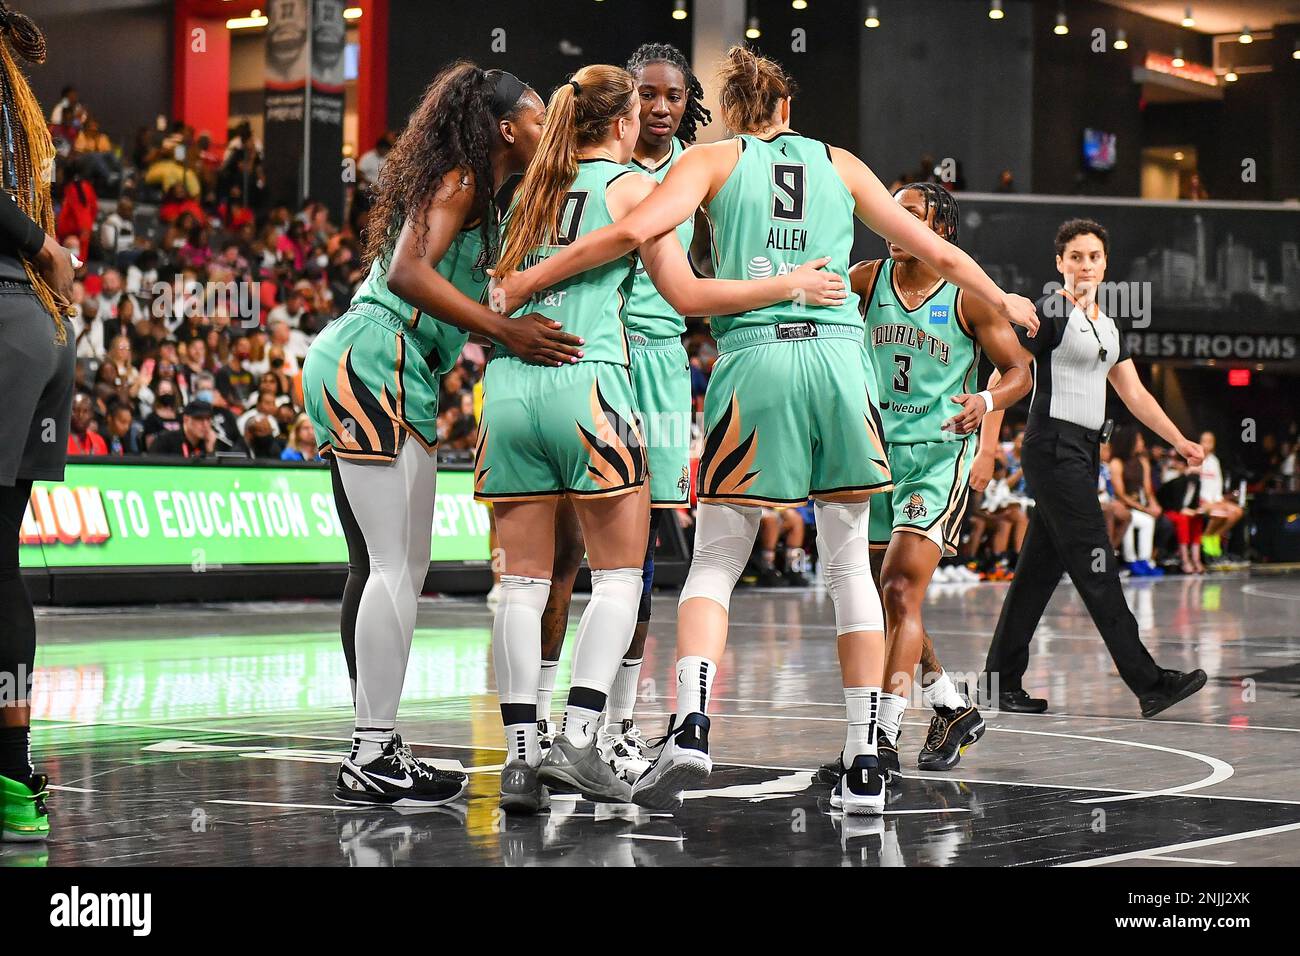 COLLEGE PARK, GA – AUGUST 12: New York players huddle at the free throw  line during the WNBA game between the New York Liberty and the Atlanta Dream  on August 12th, 2022